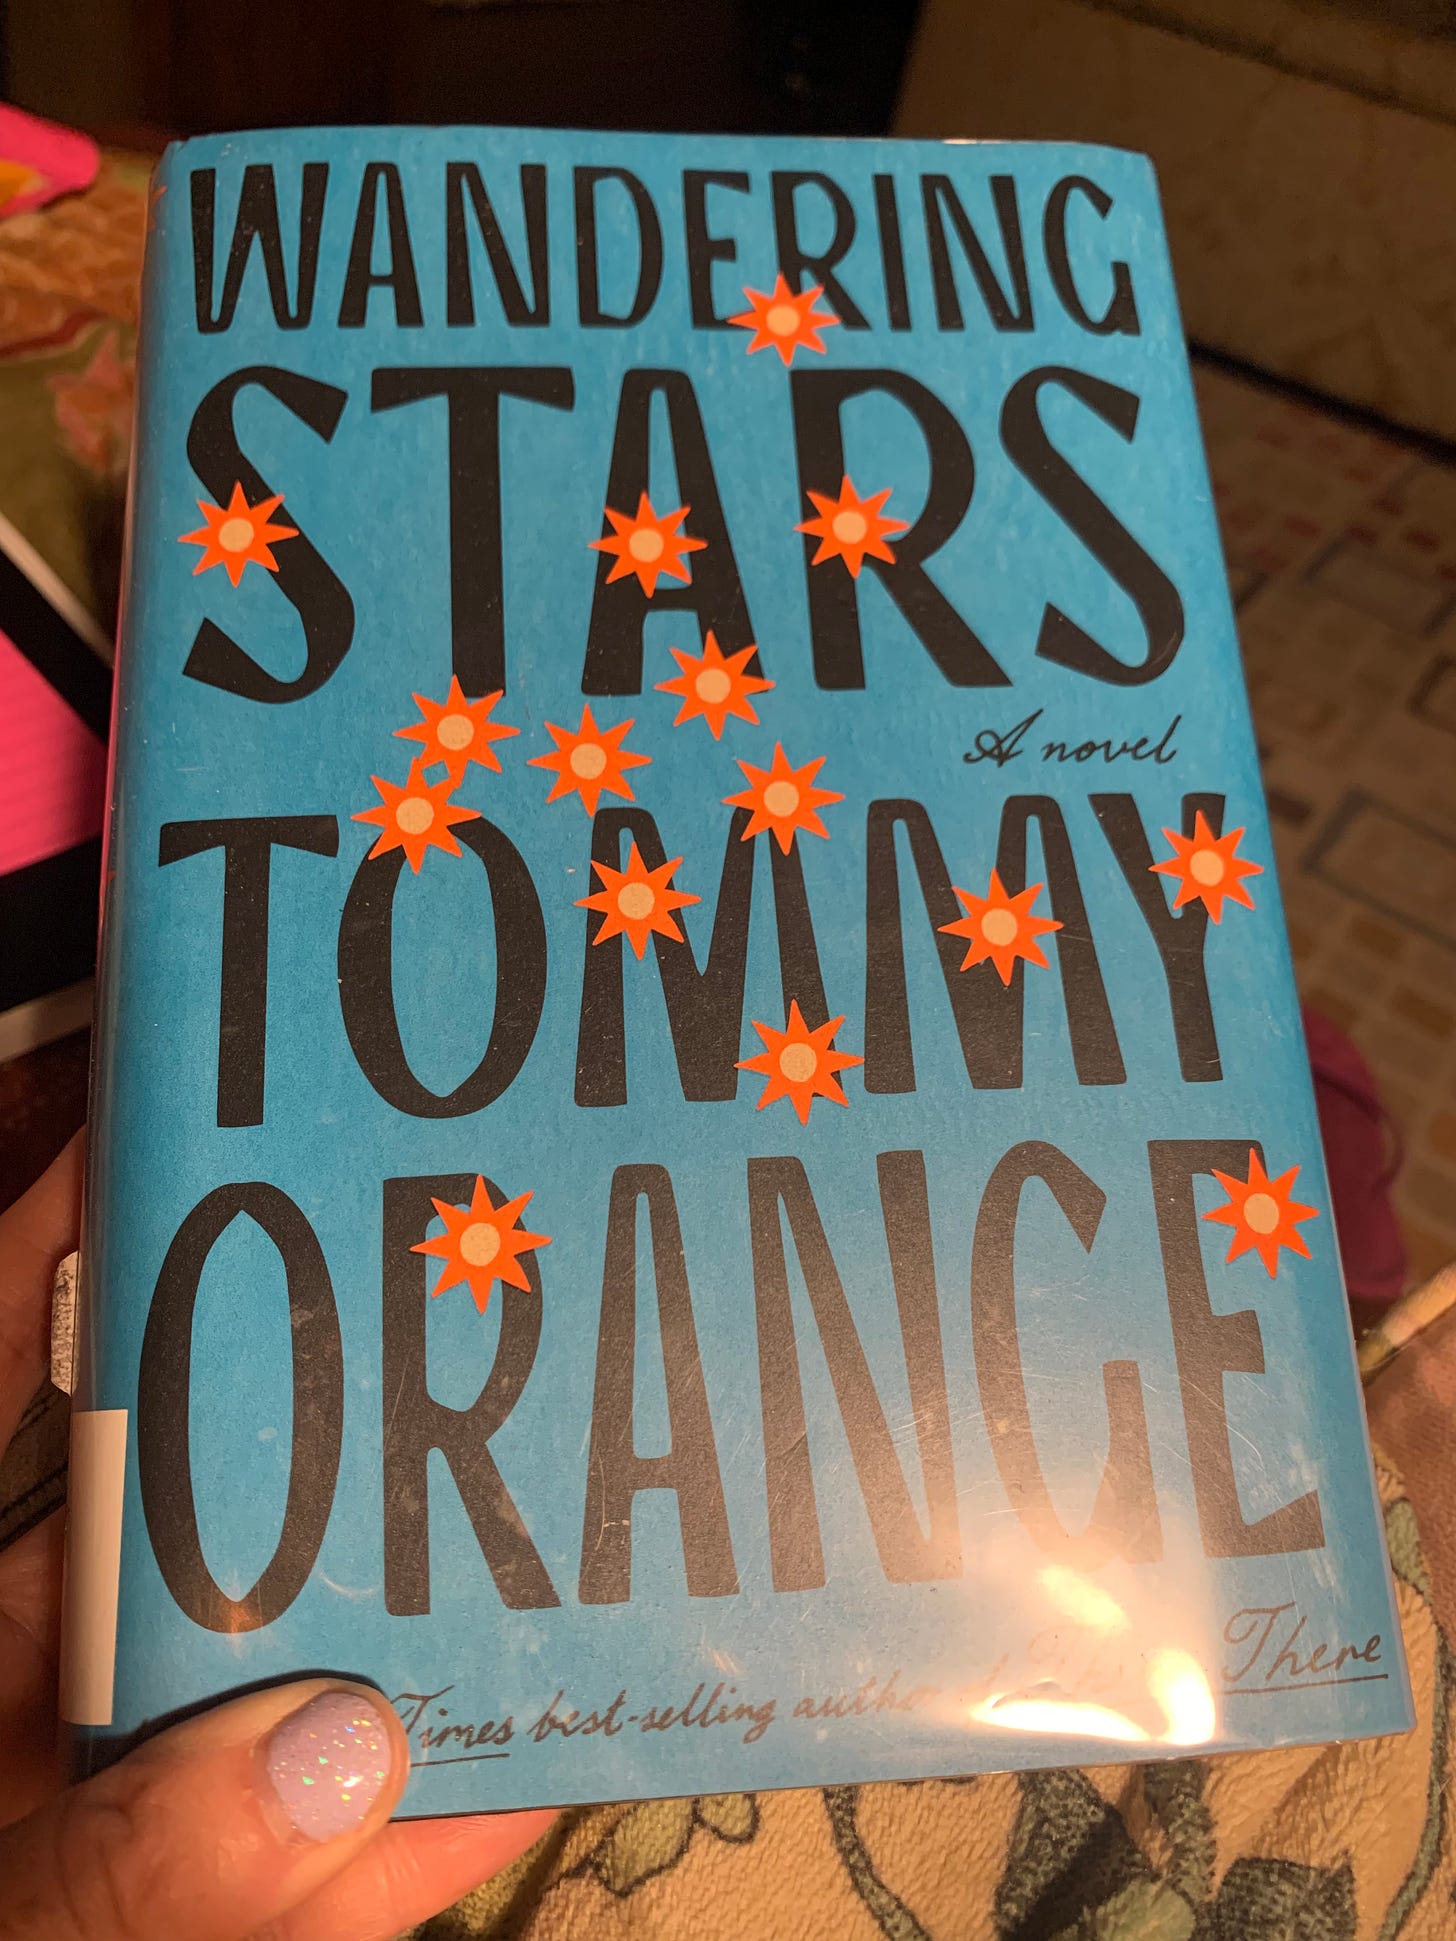 Book cover of Tommy Orange's newest: Wandering Starts